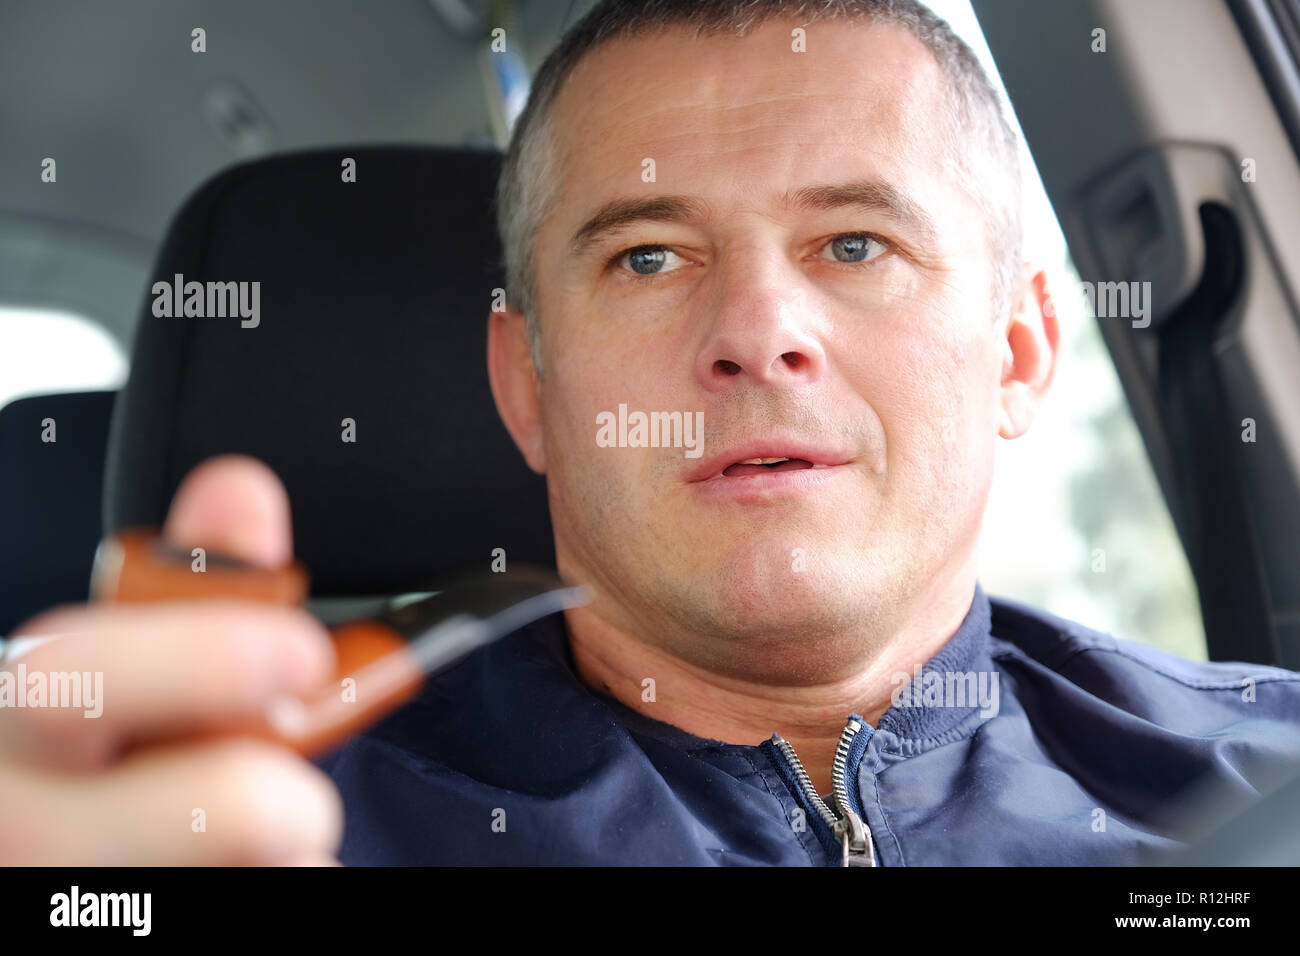 The man in the car driving. Tobacco pipe in hand. Stock Photo